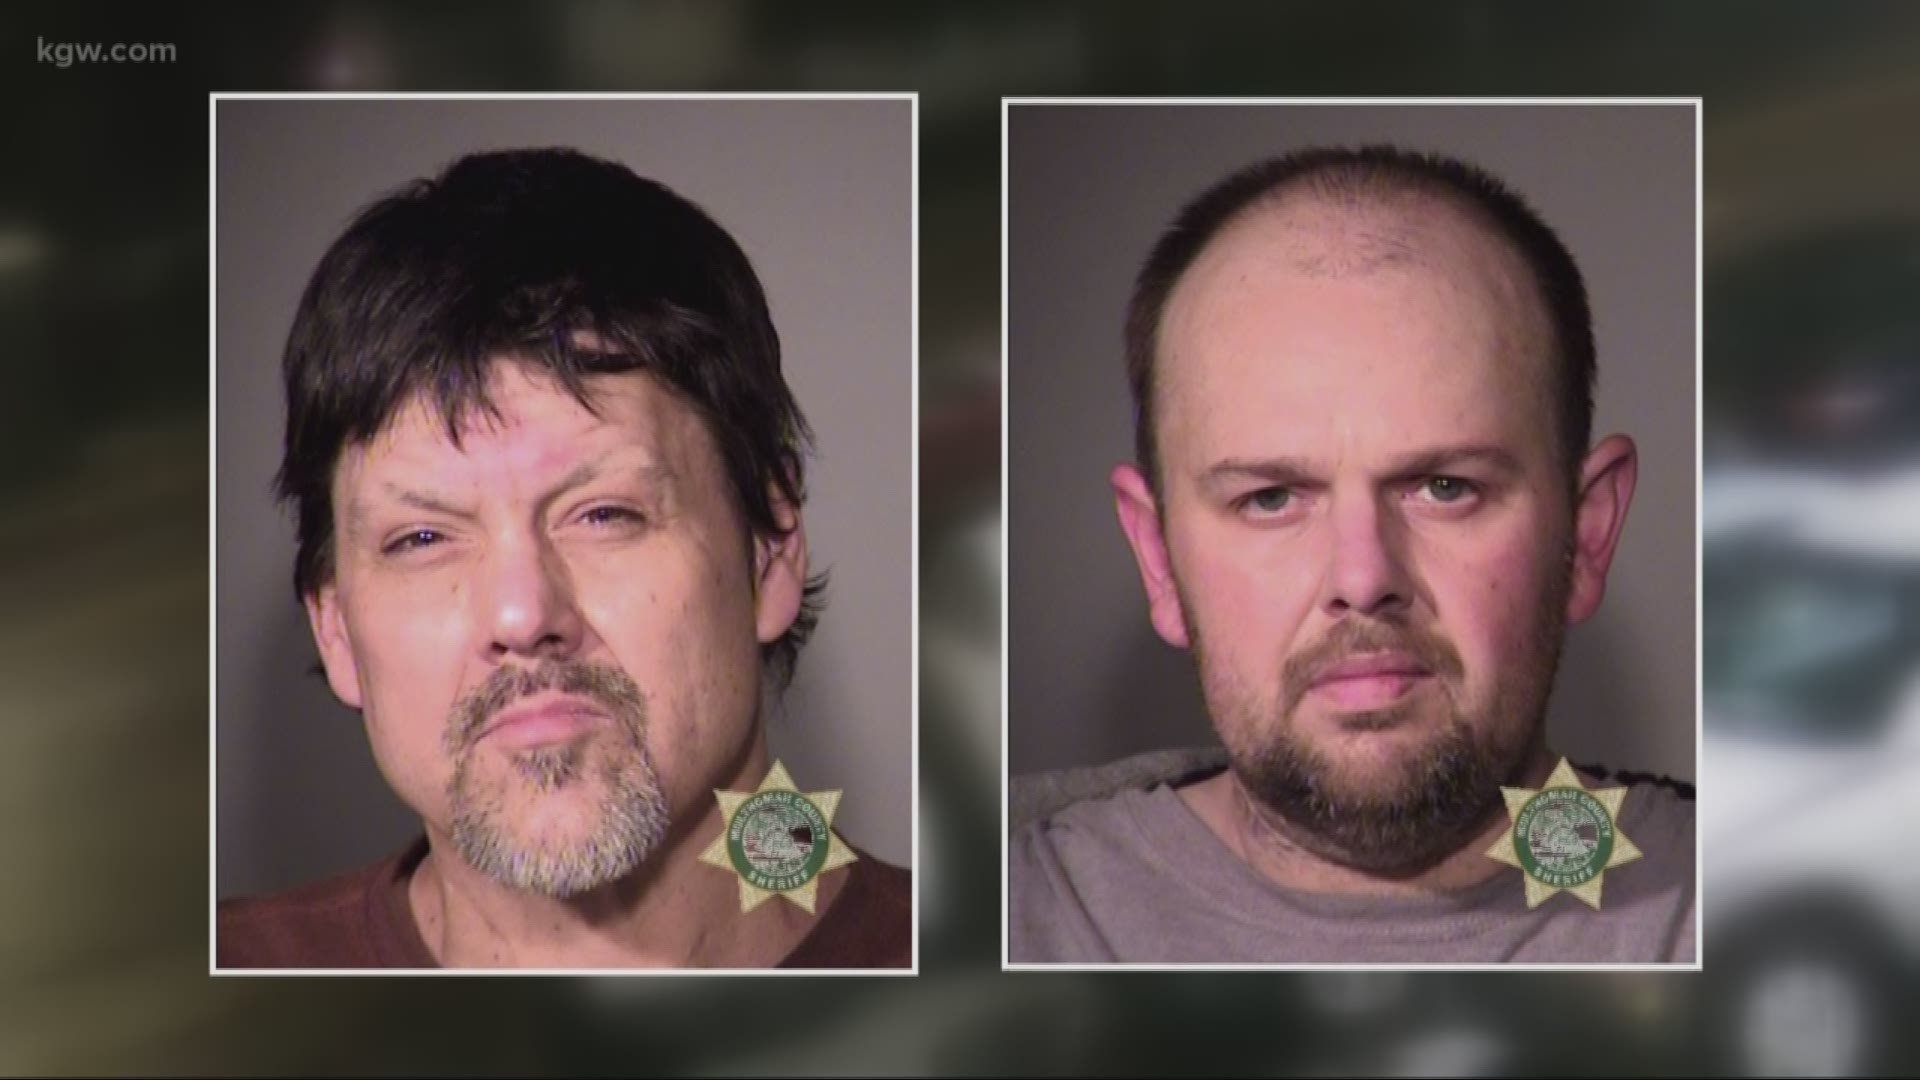 Portland police arrested two men accused of stealing a catalytic converter from a Portland car dealership.